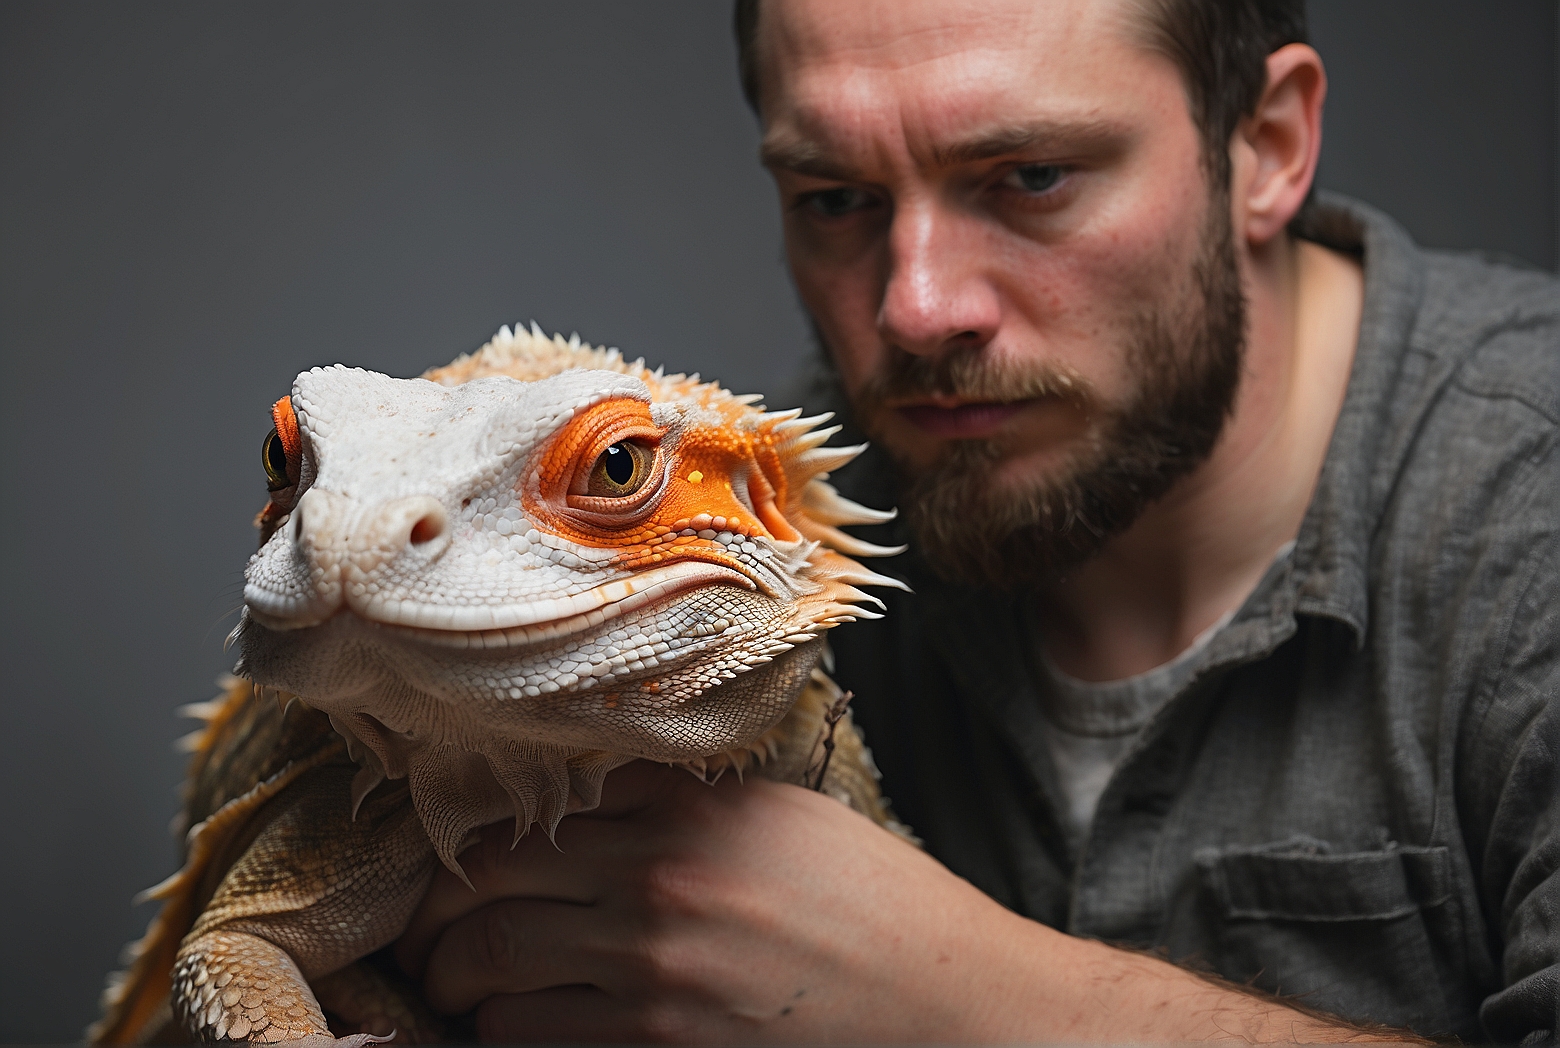 Why Wont My Bearded Dragon Let Me Hold It?